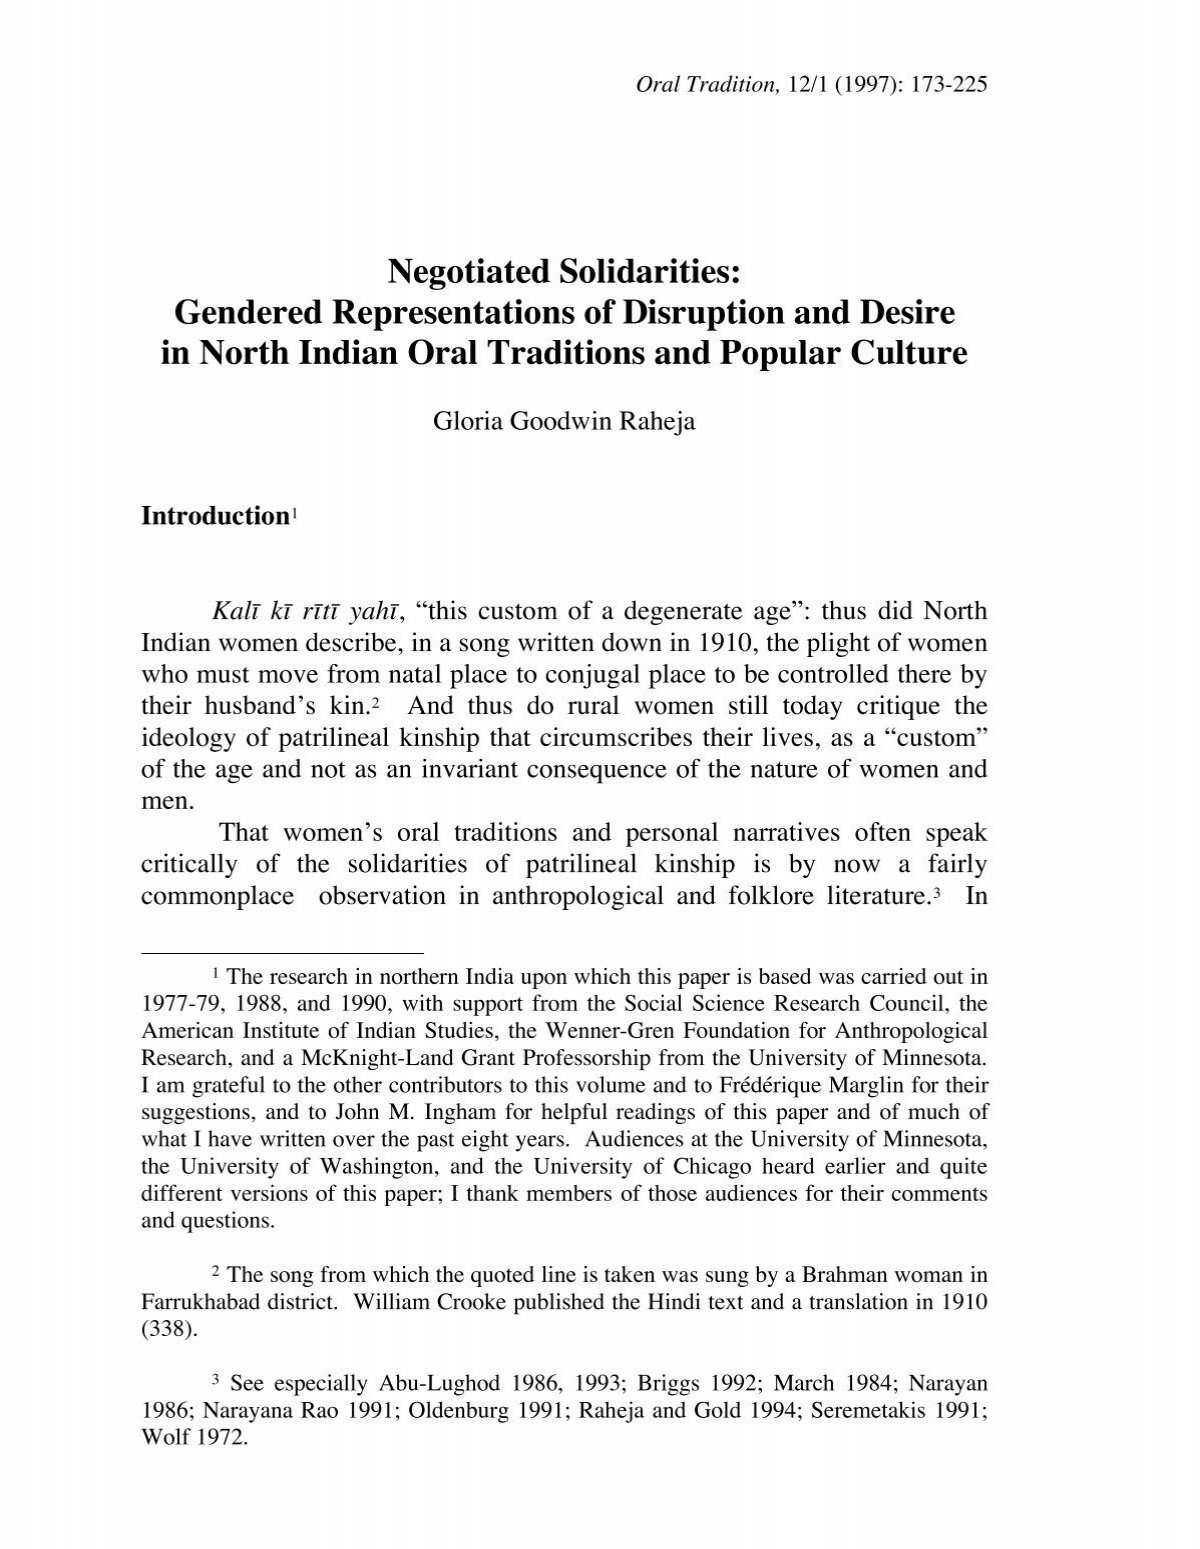 Negotiated Solidarities Oral Tradition Journal